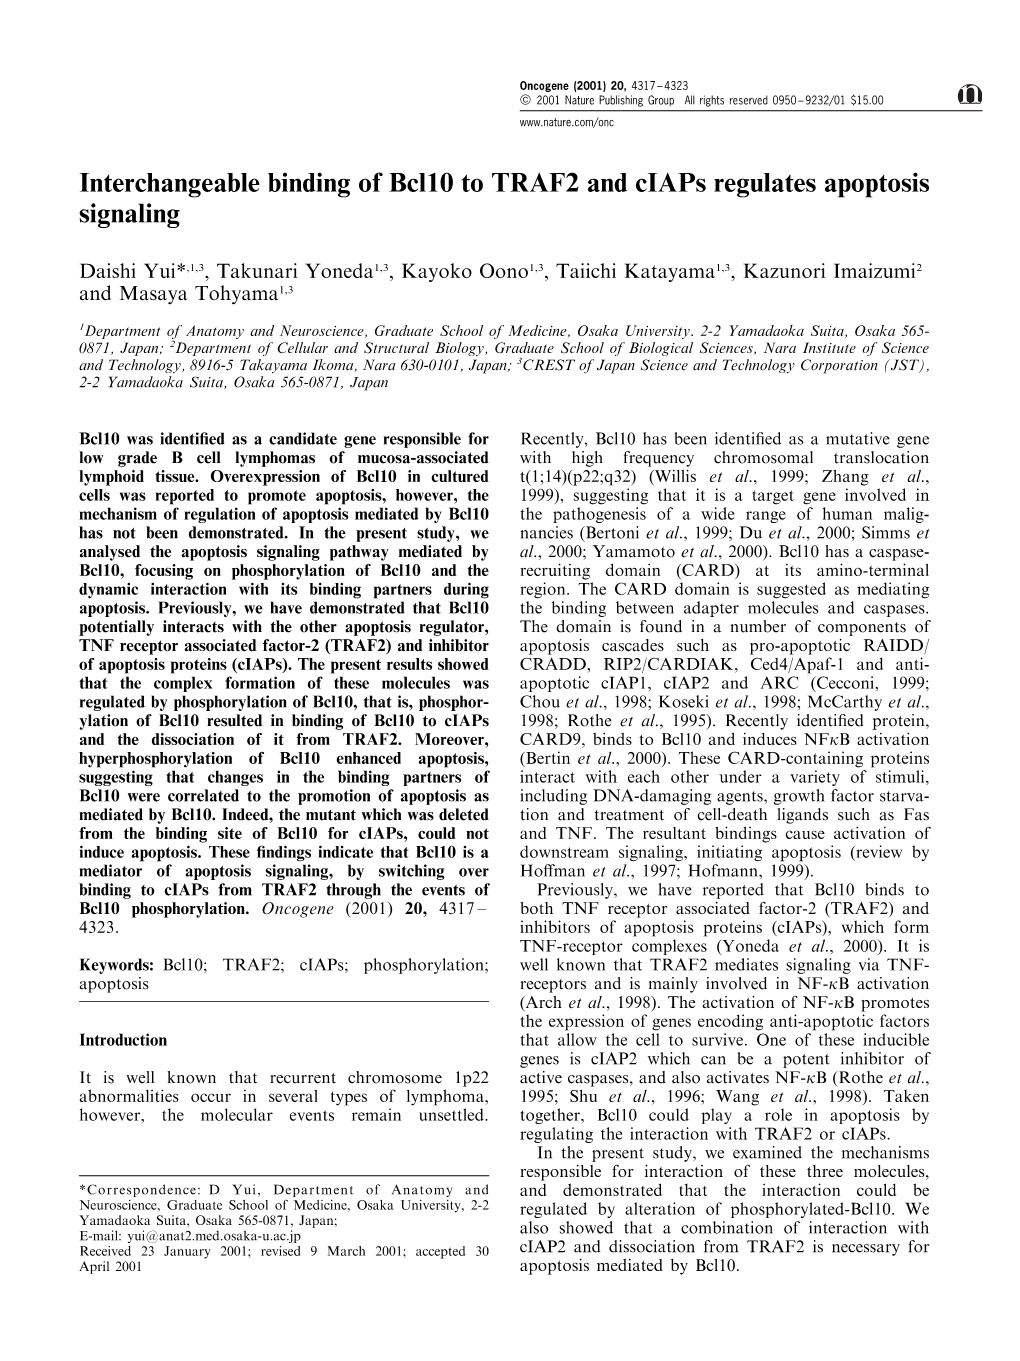 Interchangeable Binding of Bcl10 to TRAF2 and Ciaps Regulates Apoptosis Signaling